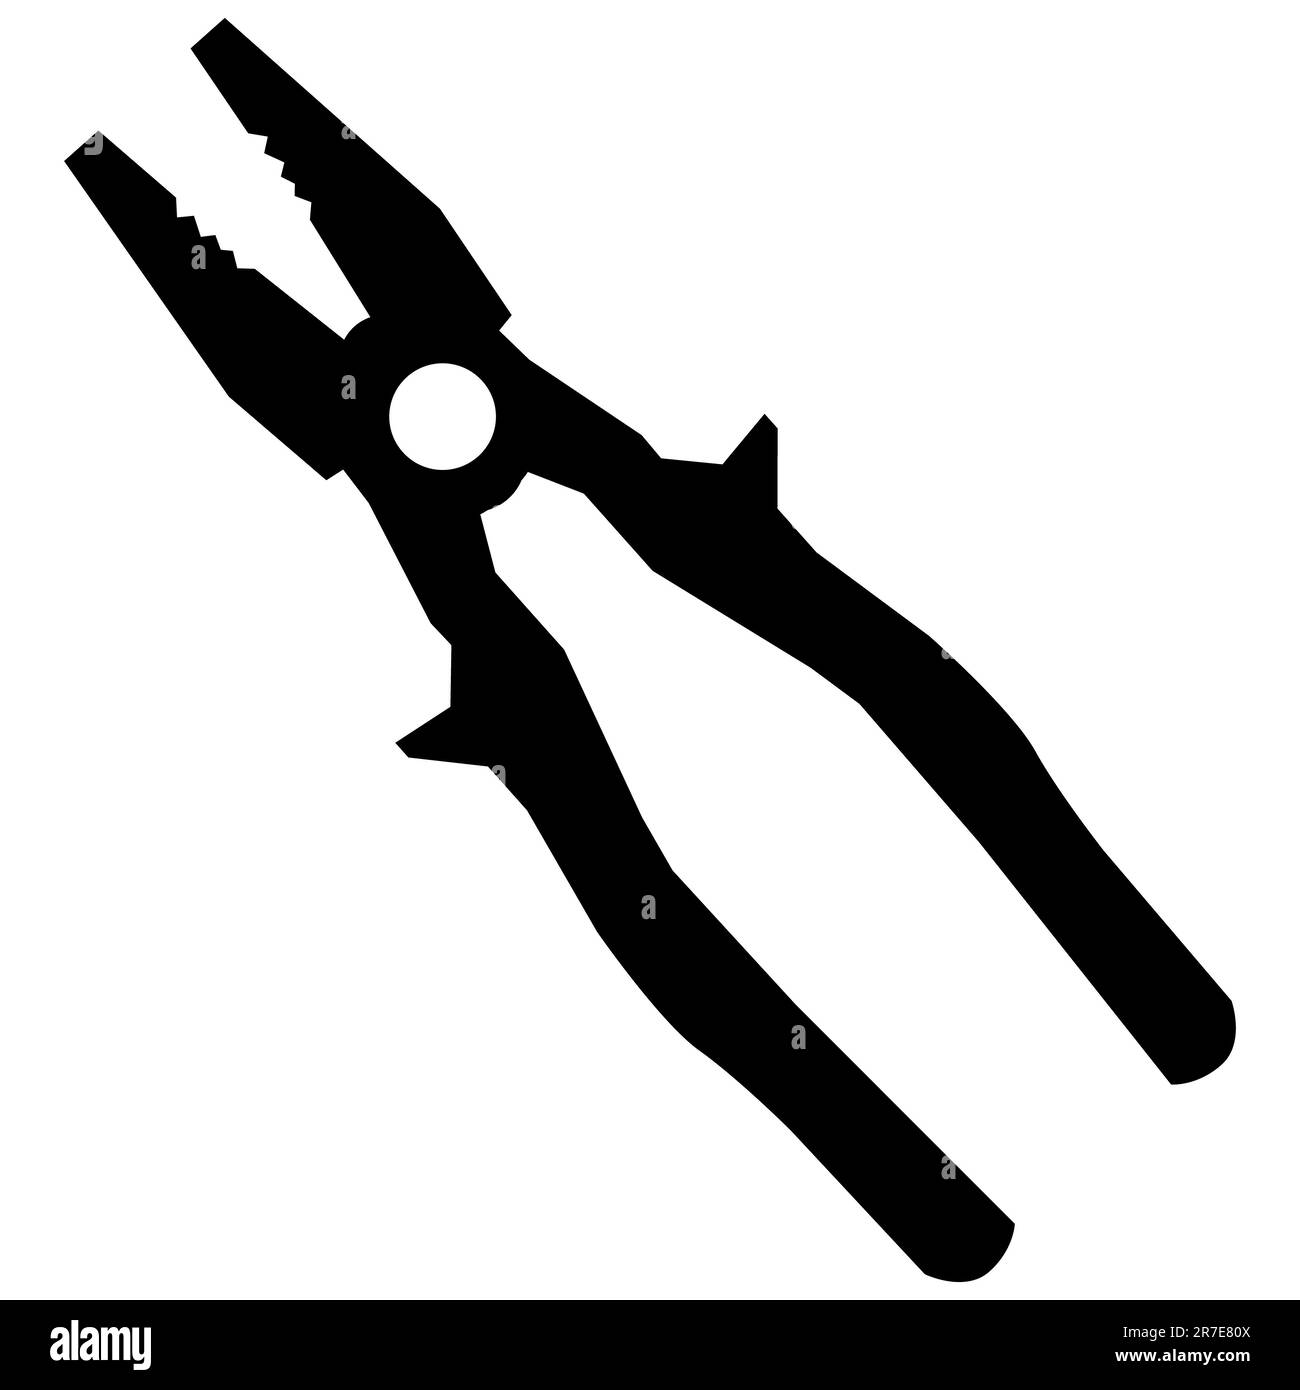 Pliers icon. Combination Pliers sign. Black pliers symbol. flat style. Stock Photo